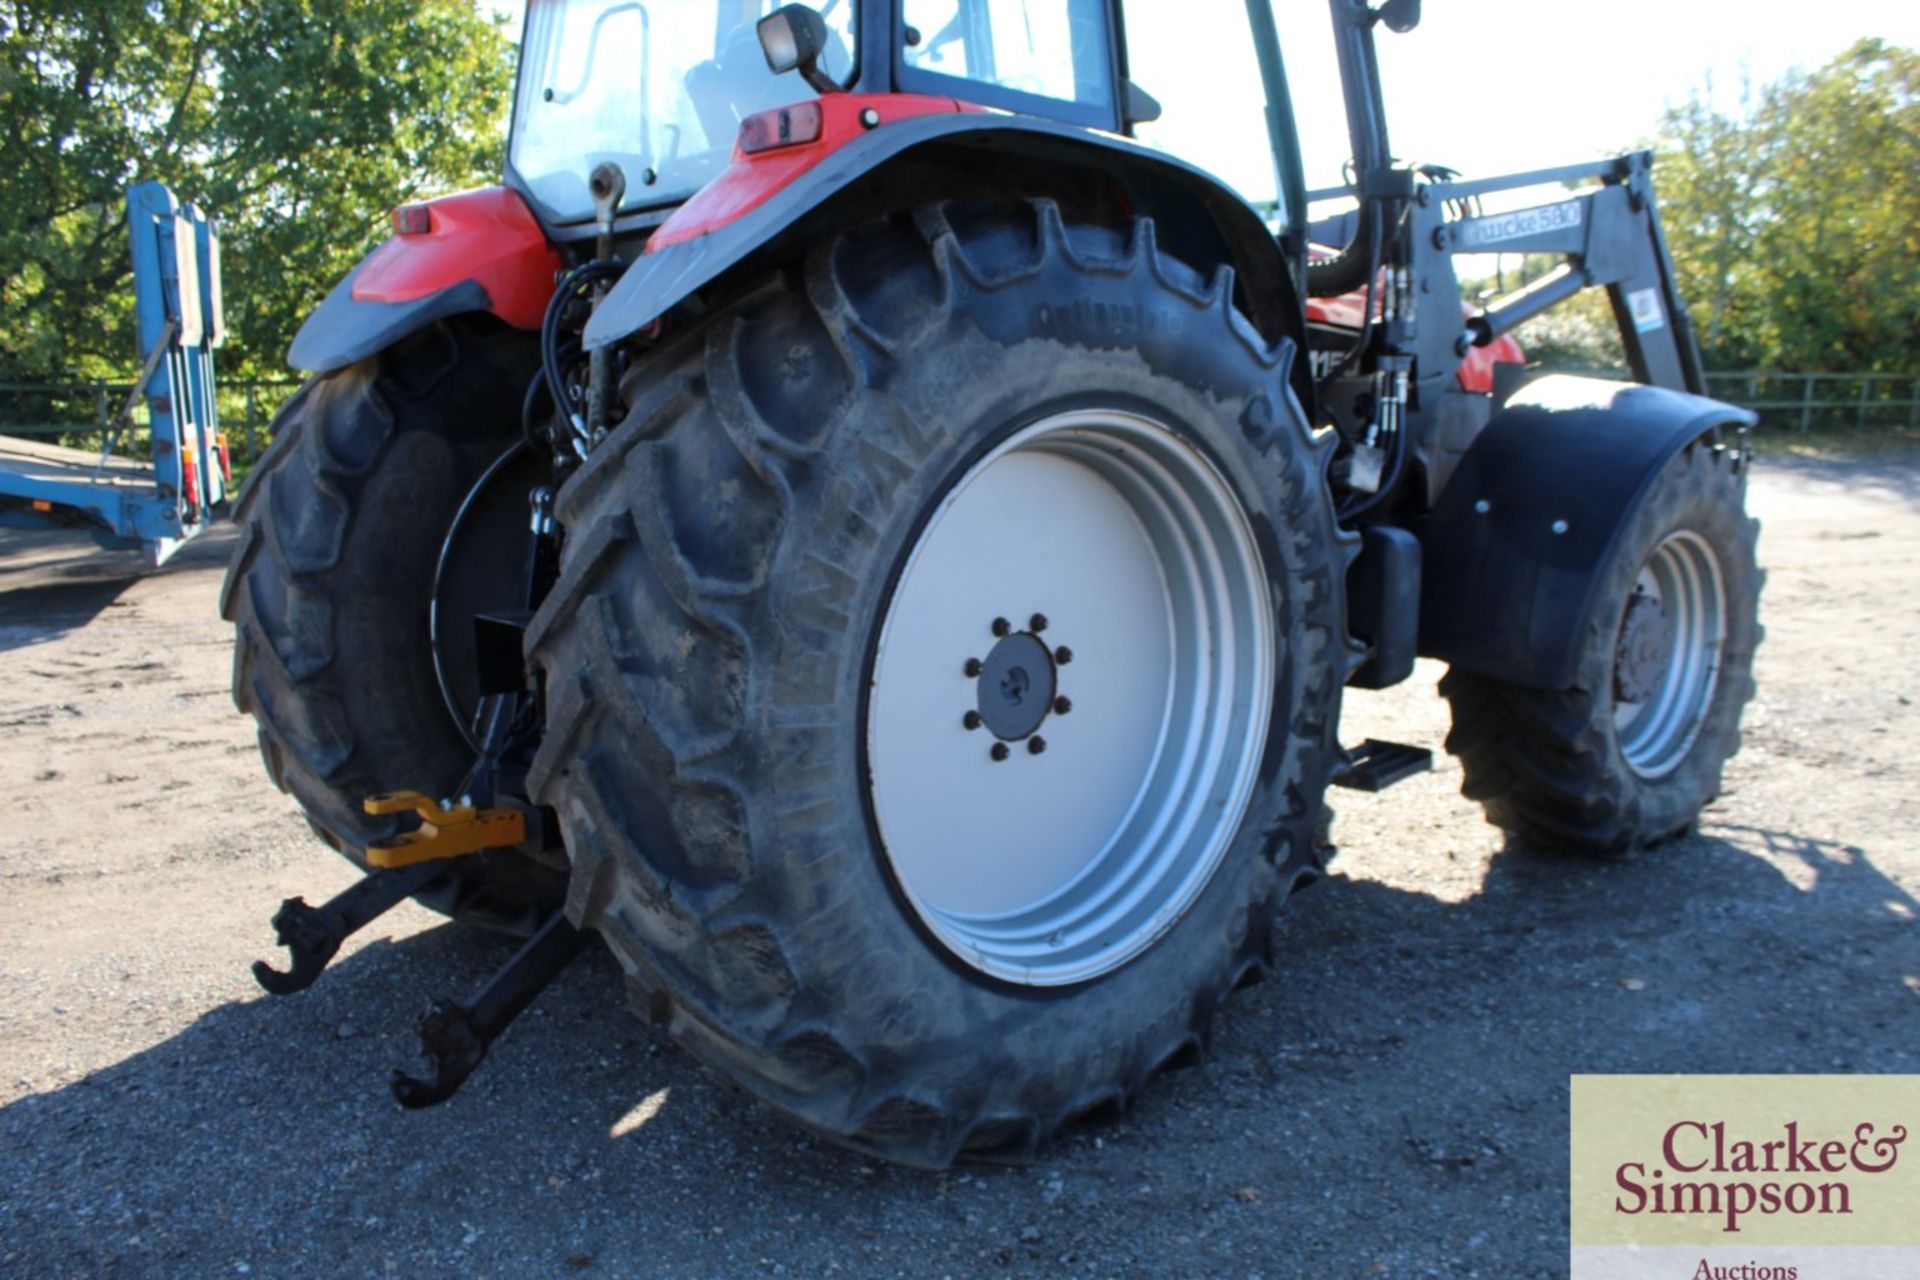 New Holland TM150 4WD tractor. 28/10/2000. 11,839 hours. 520/85R42 rear wheels and tyres @ 60%. - Image 31 of 58